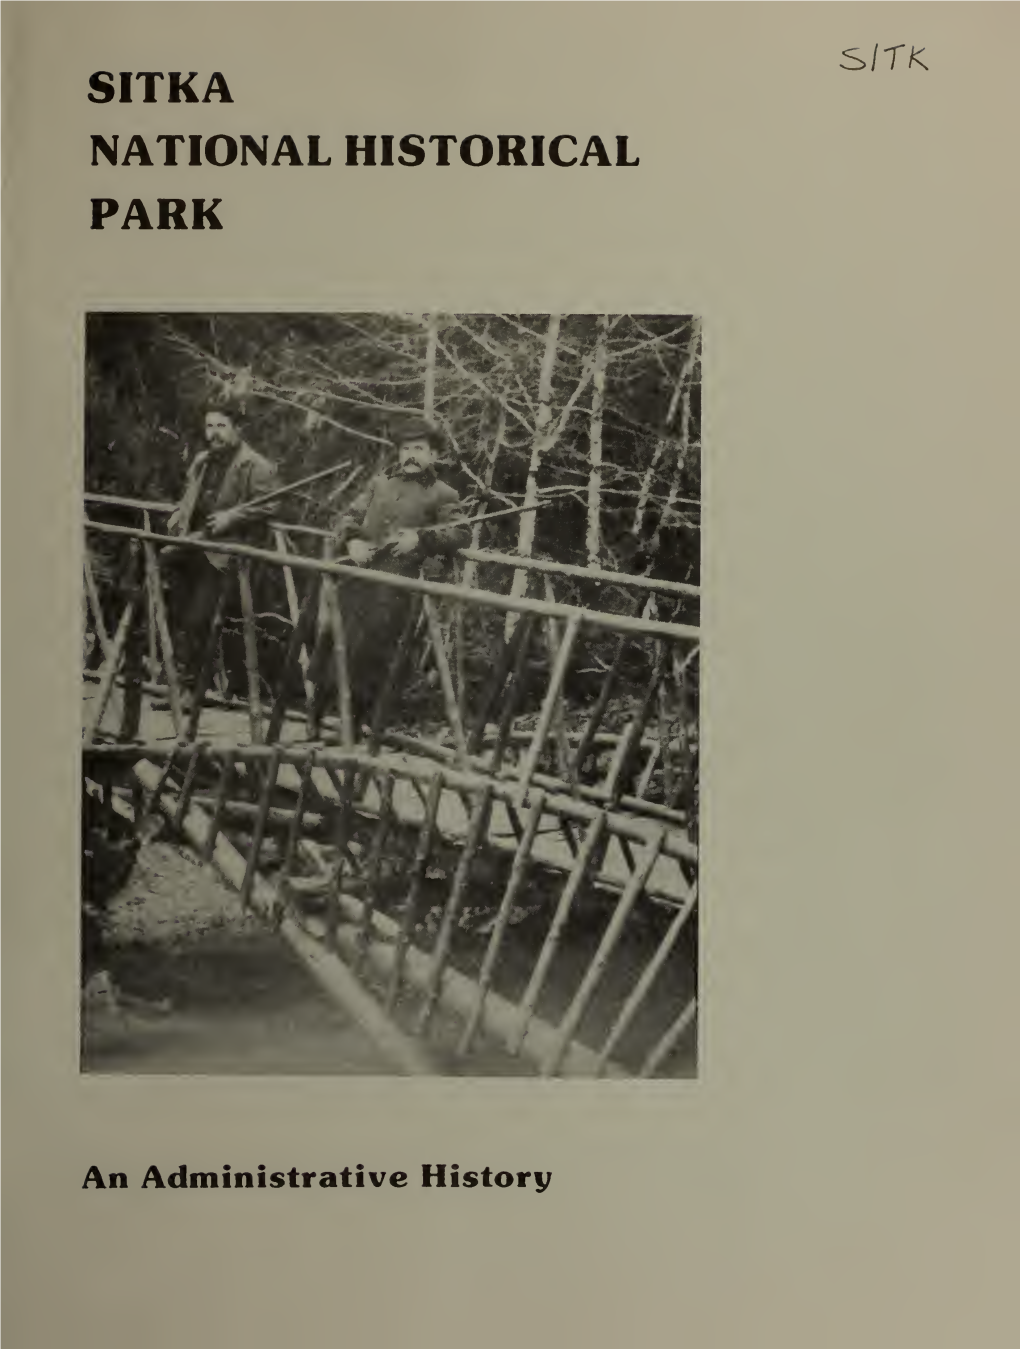 Administrative History of Sitka National Historic Park